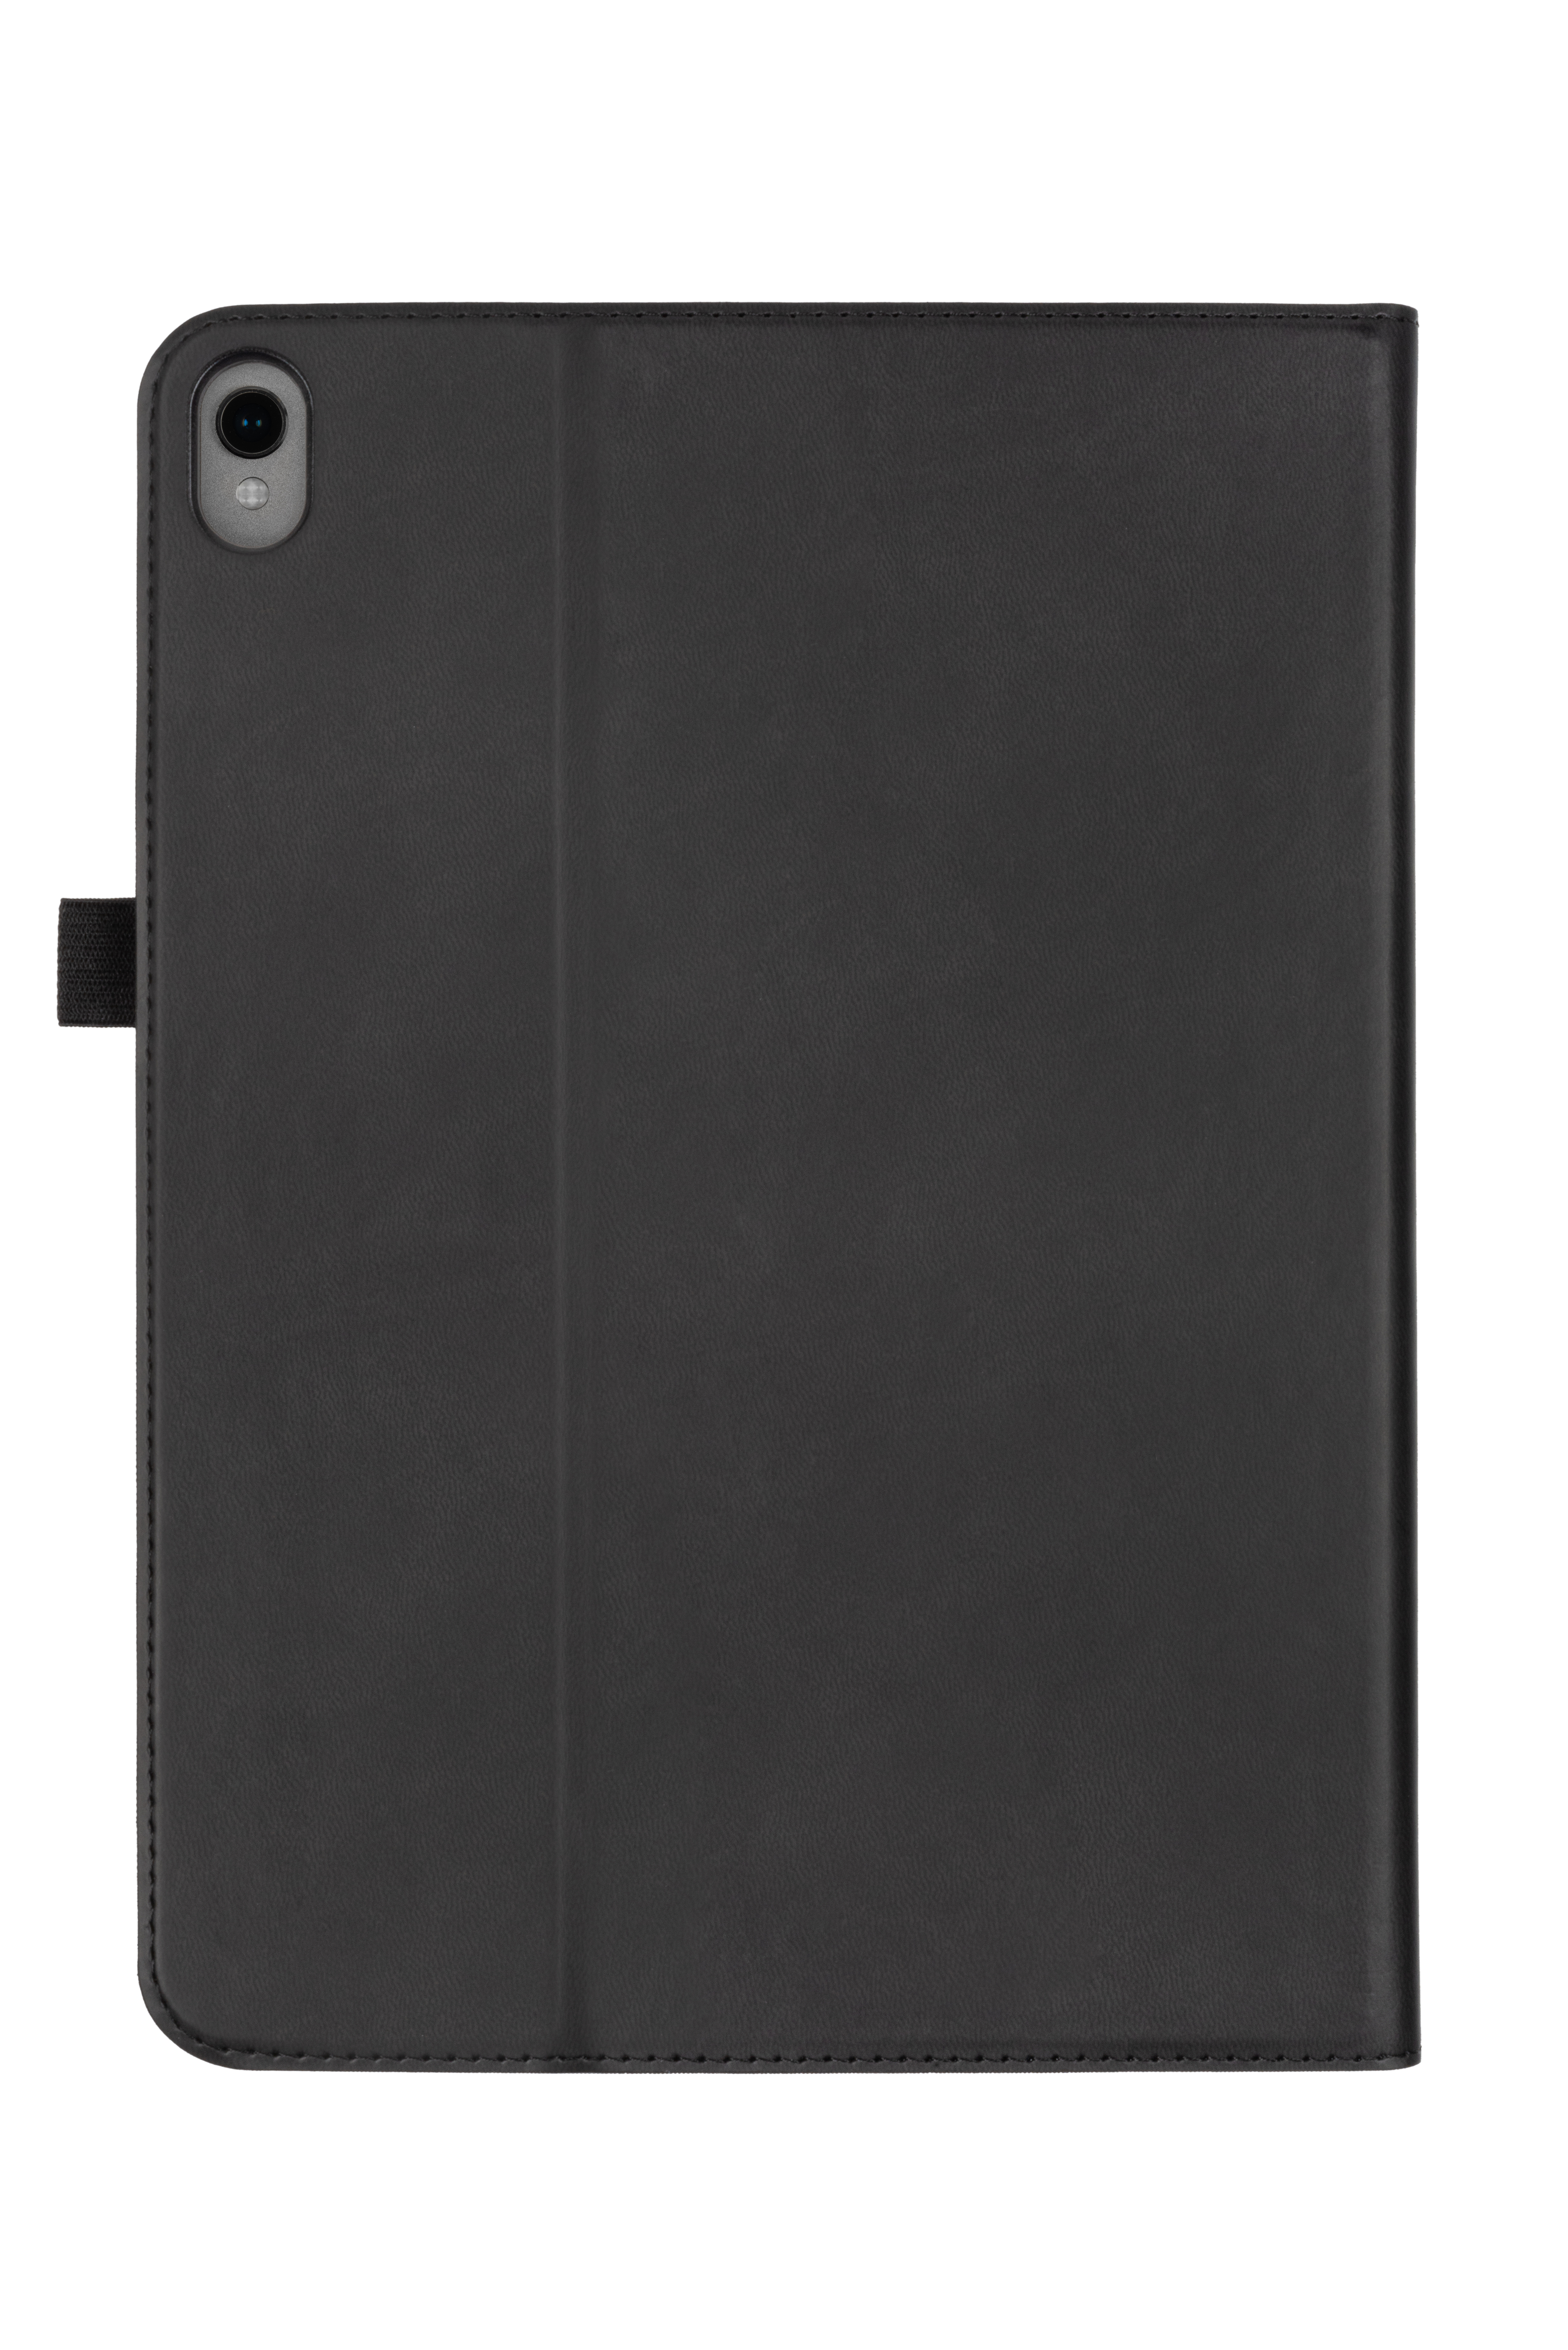 GECKO COVERS Easy-Click 2.0 Schwarz Bookcover (2020) PU für iPad Apple Leather, Tablet Air Hülle Cover